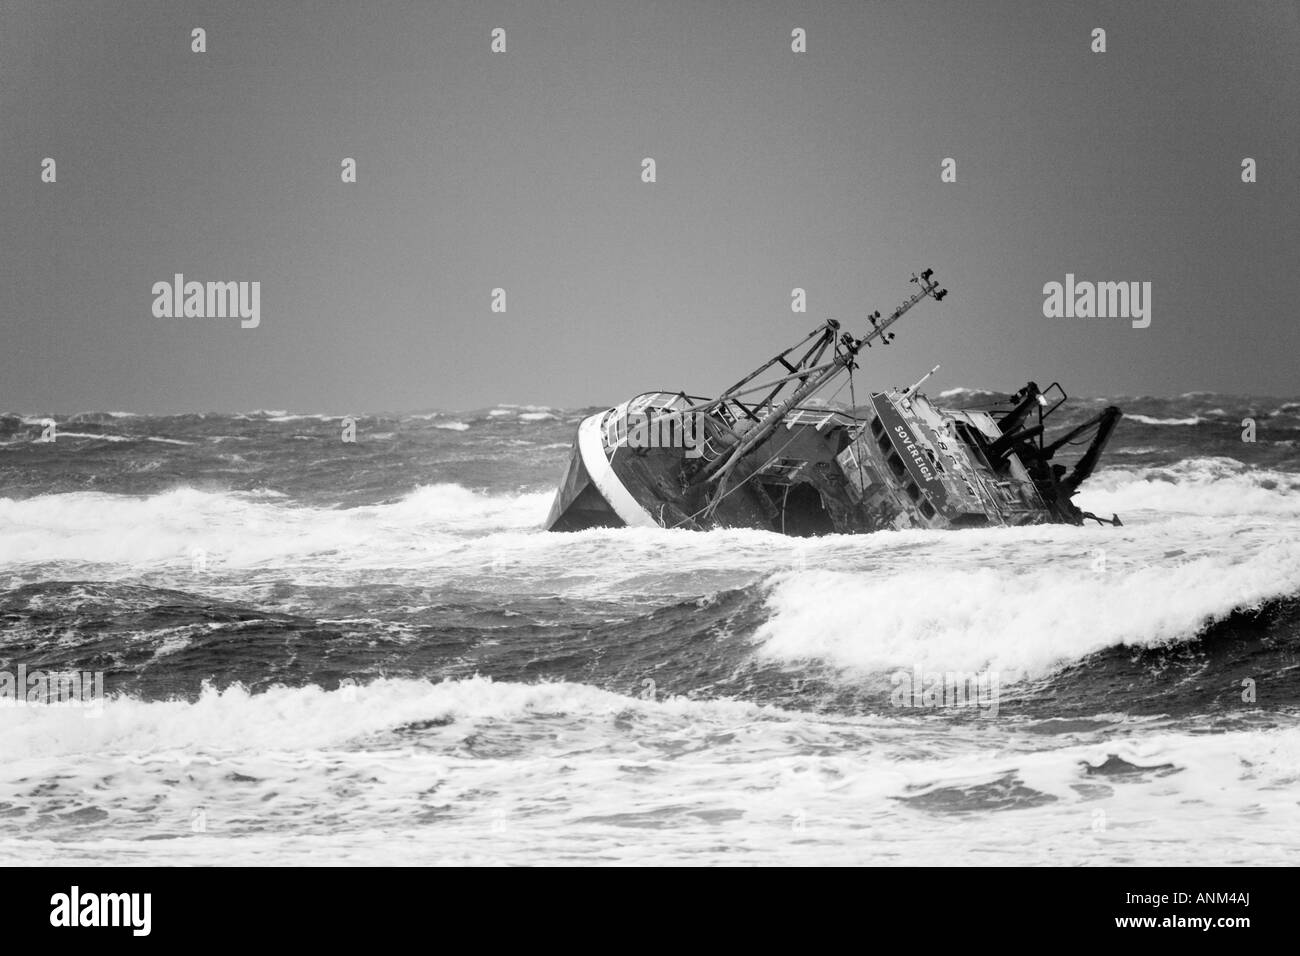 Beached grounded wreck of Banff Fishing Vessel boat BF 380 aground on rocks at Cairnbulg Point Fraserburgh, North East Scotland. Stock Photo